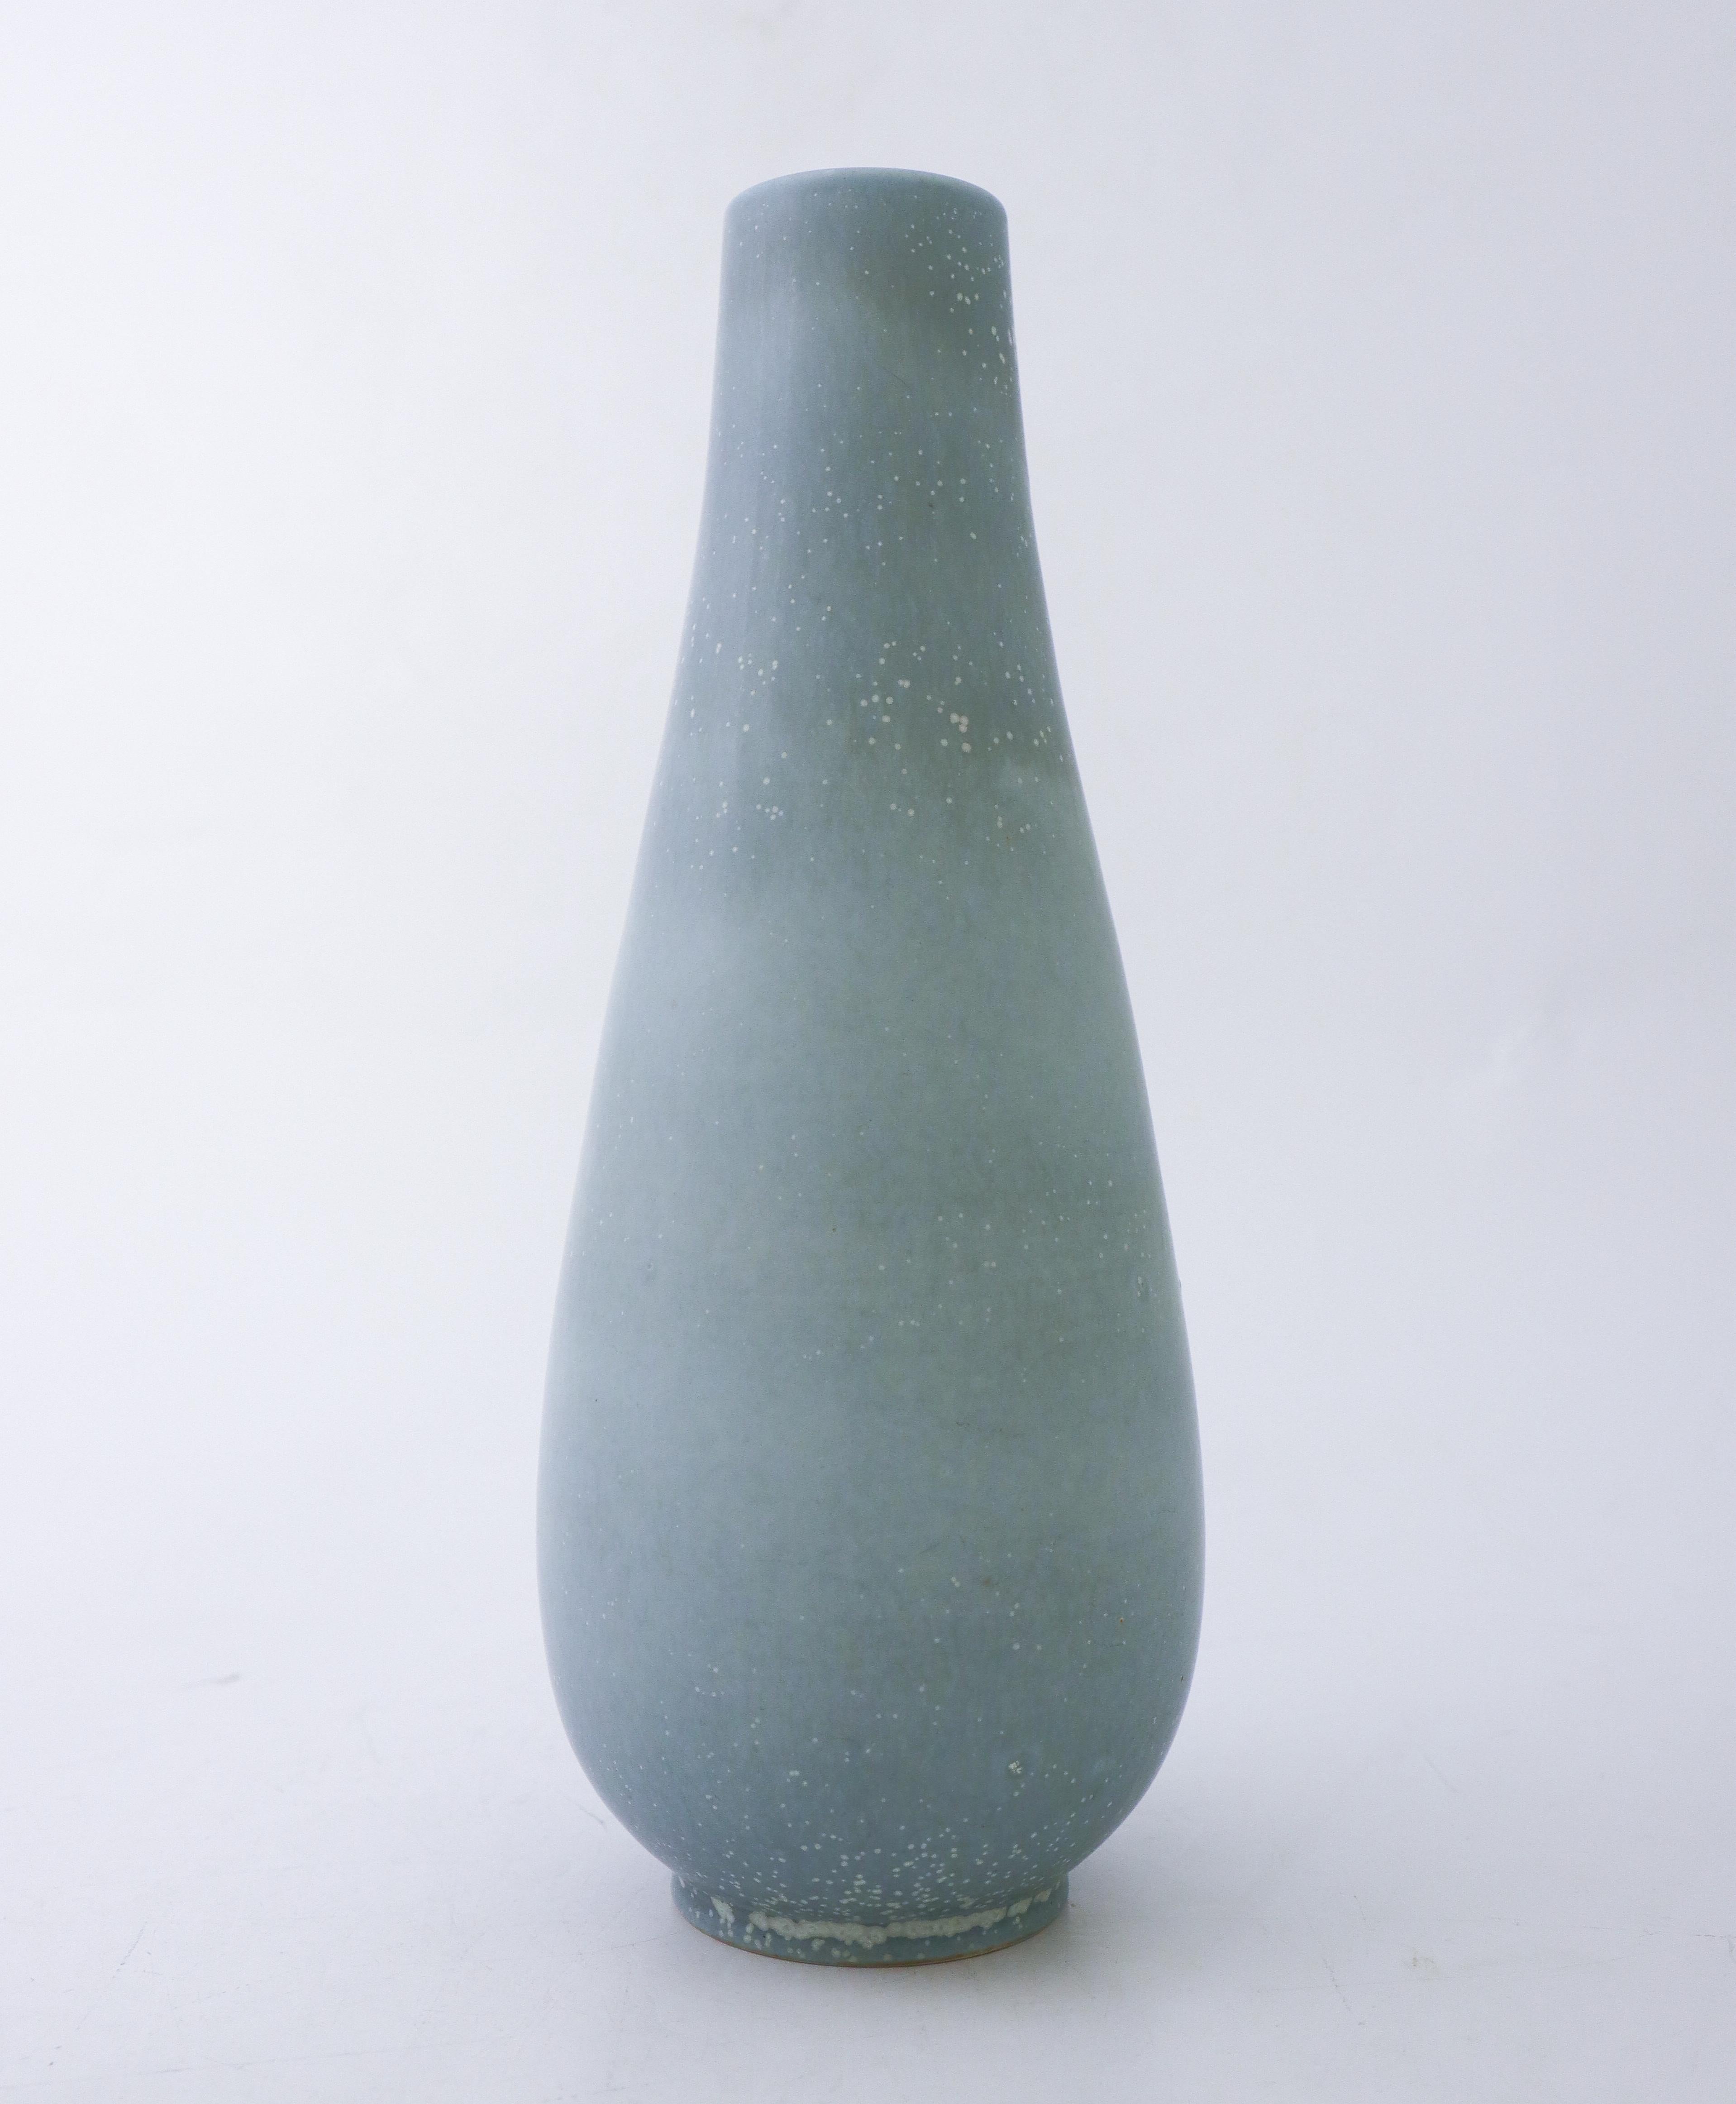 A dove blue ceramic vase designed by Gunnar Nylund at Rörstrand, it´s 28 cm (11.2) high. It´s in excellent condition except from a crack at the base from the production, therefor it is marked as 2nd quality. 

Gunnar Nylund was born in Paris 1904